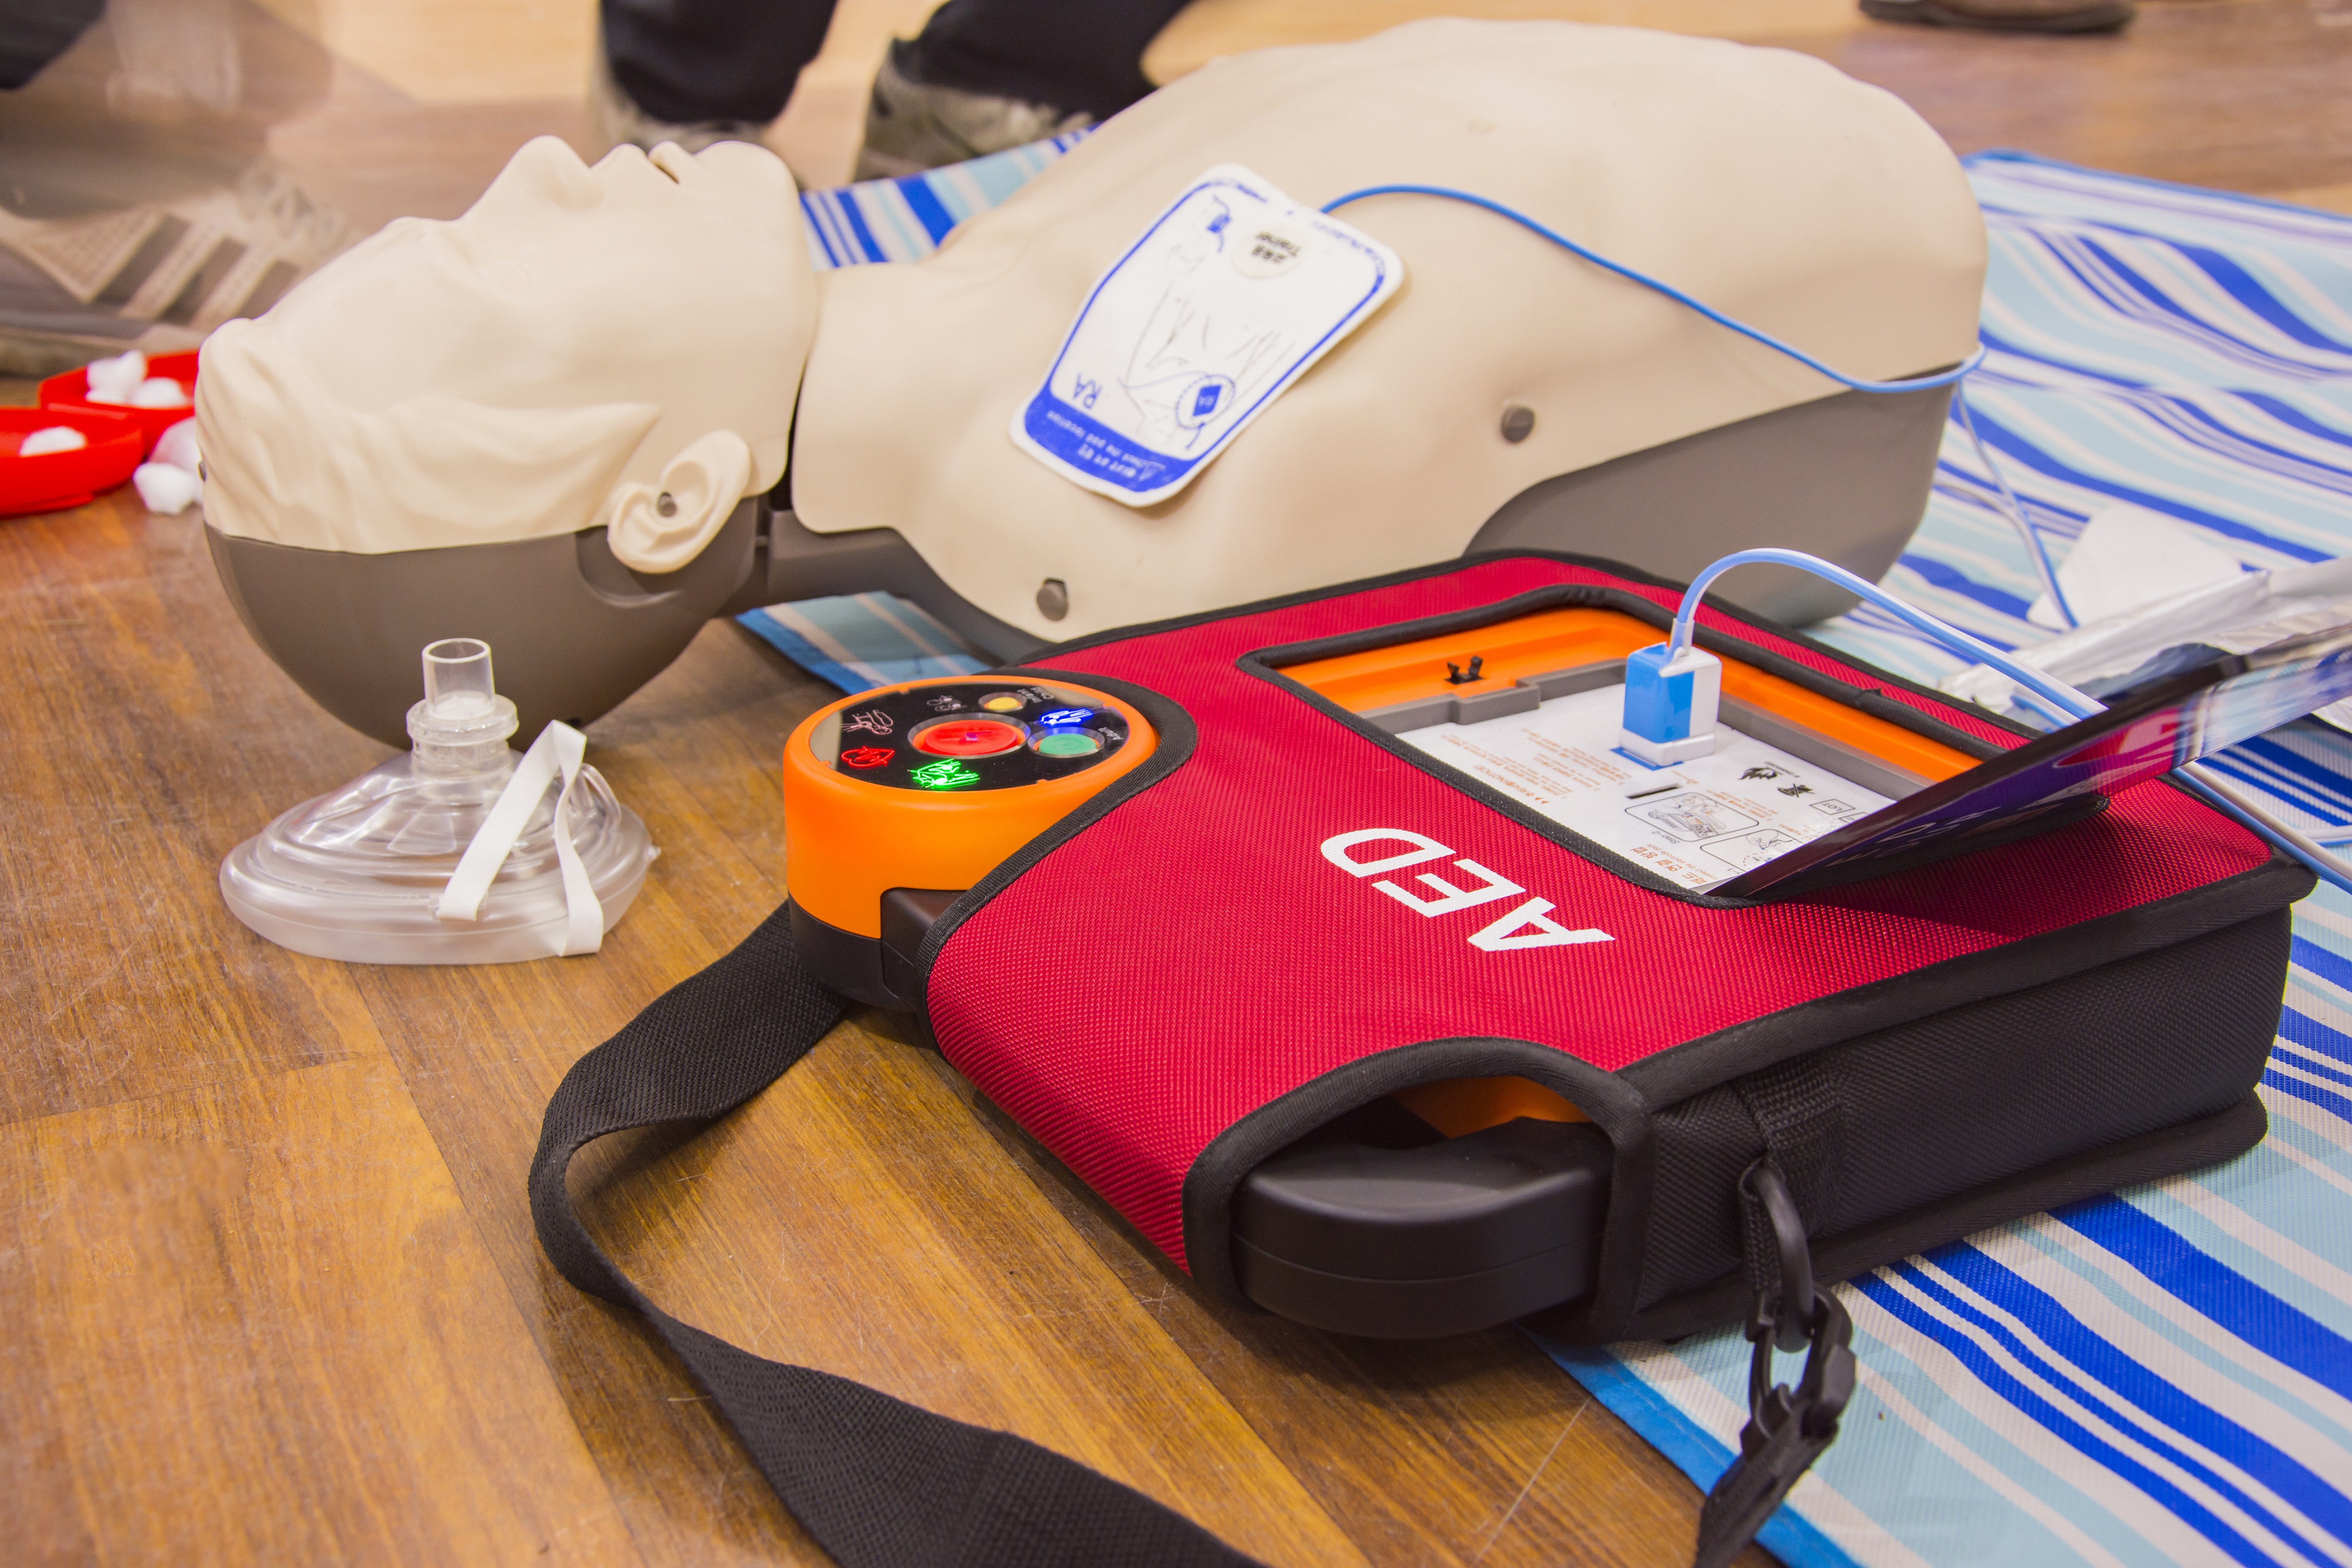 CPR AED First Aid Training Class March 26, 2022 in Tigard